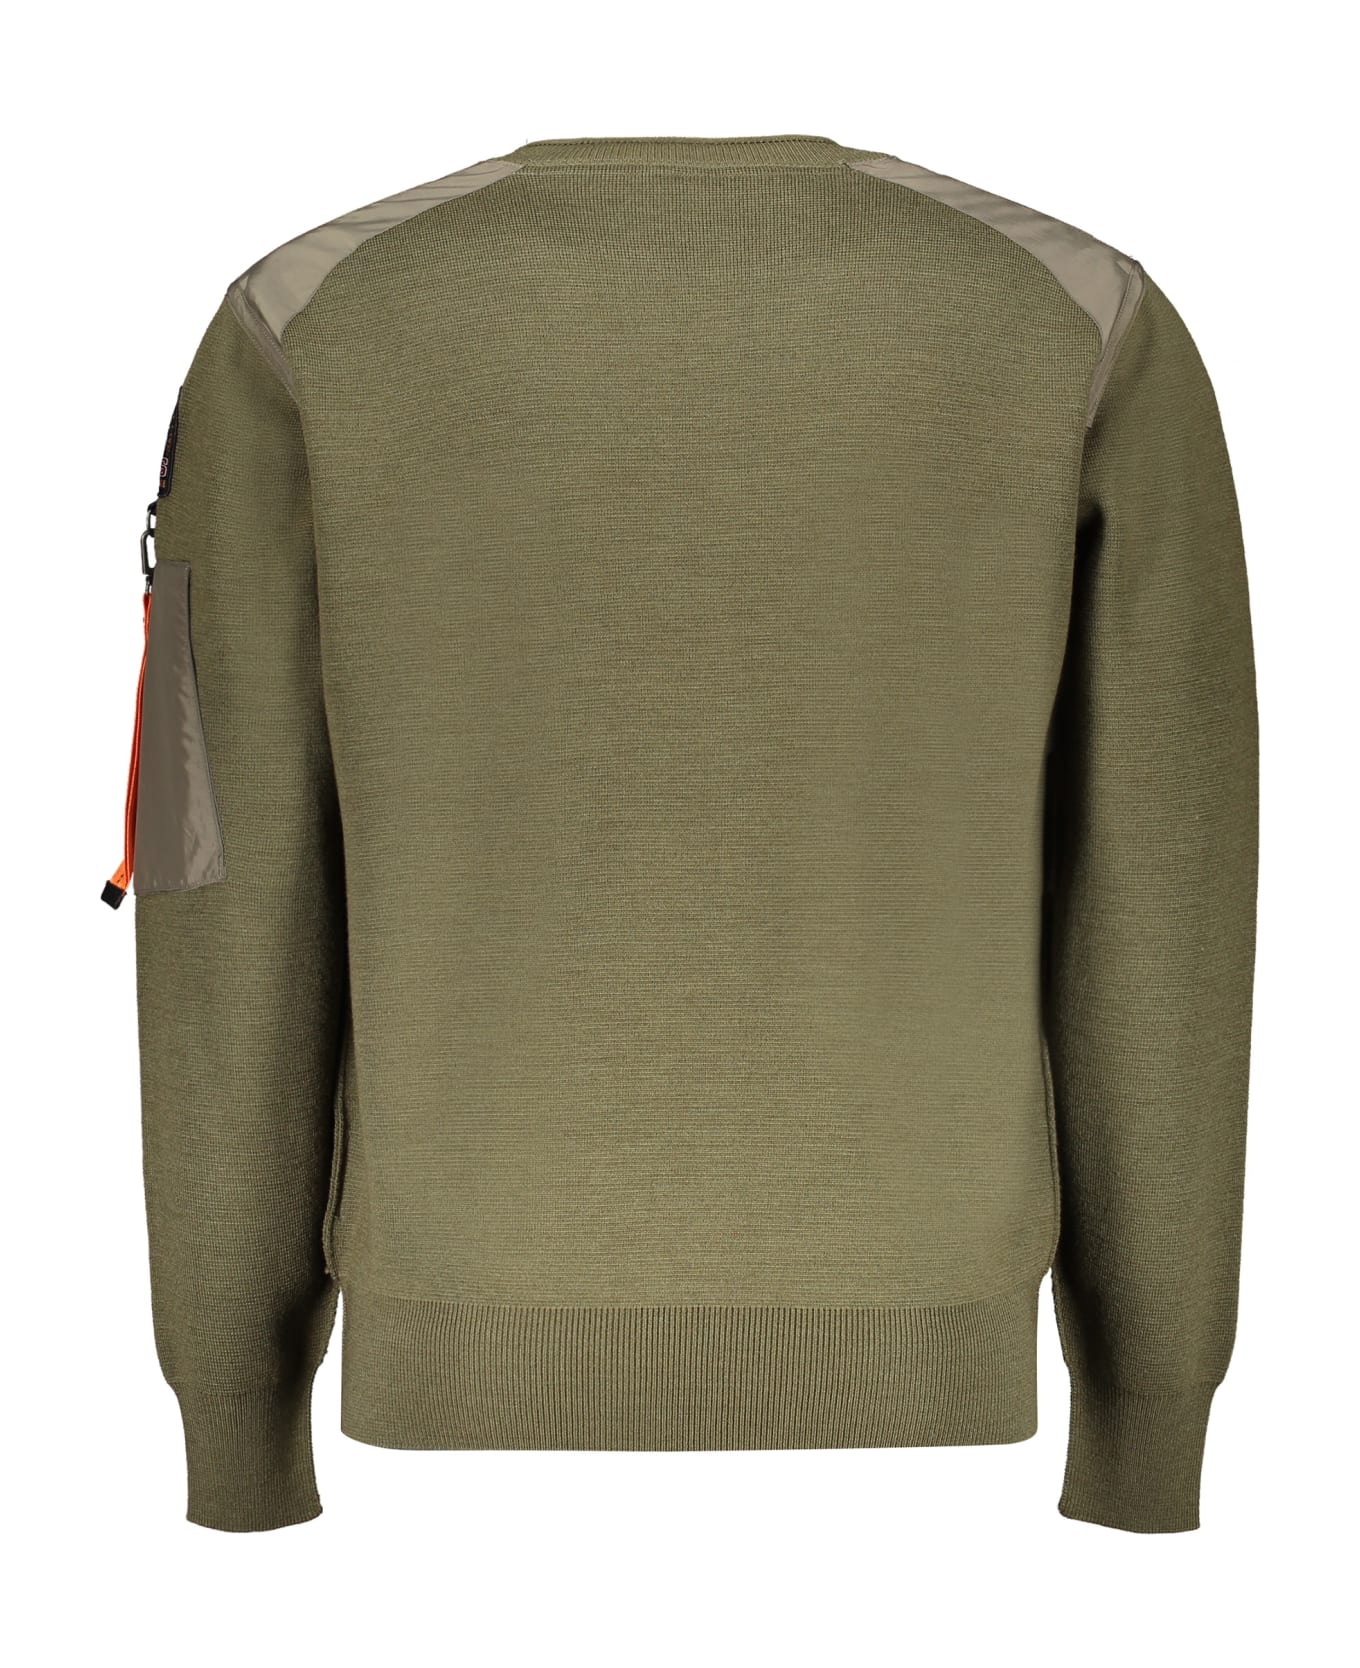 Parajumpers Braw Wool Sweater - green ニットウェア